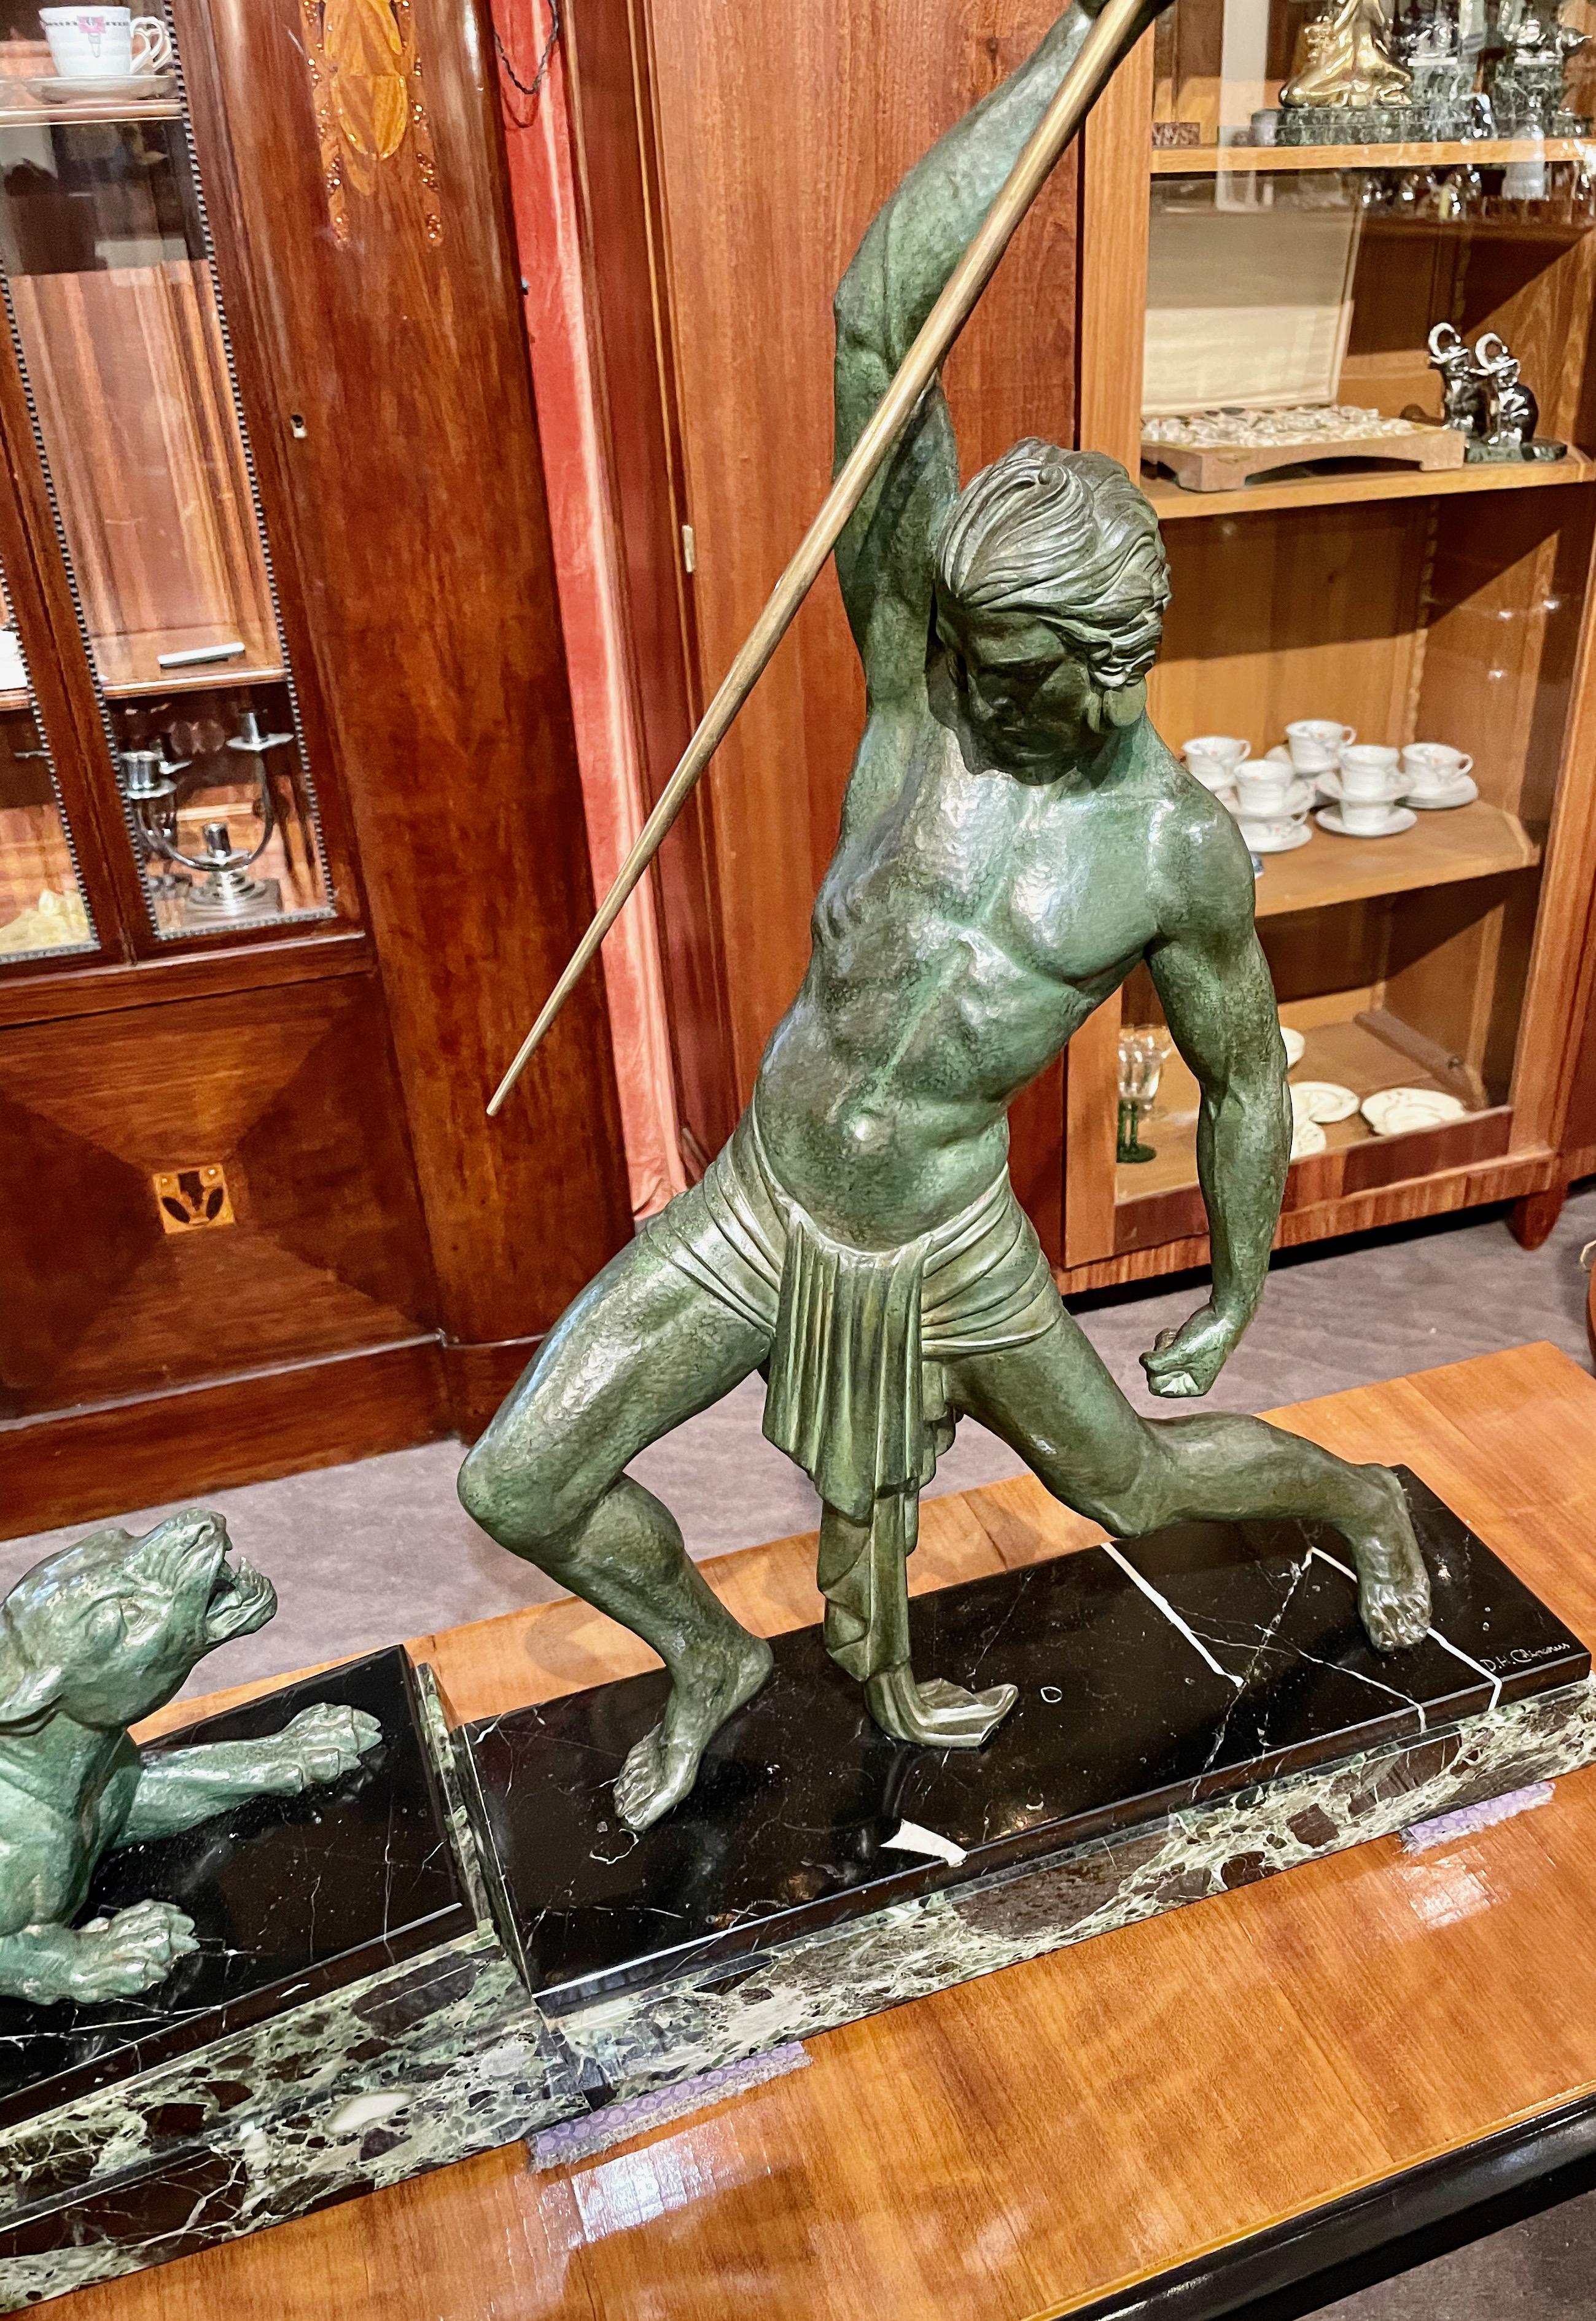 Large Art Deco sculpture of hunter and panther (or lion) by the famous sculptor Demetre H. Chiparus. The Art metal sculpture has a beautiful green verdigris patina and stands on an angled green/white/black multi-color marble base. Excellent